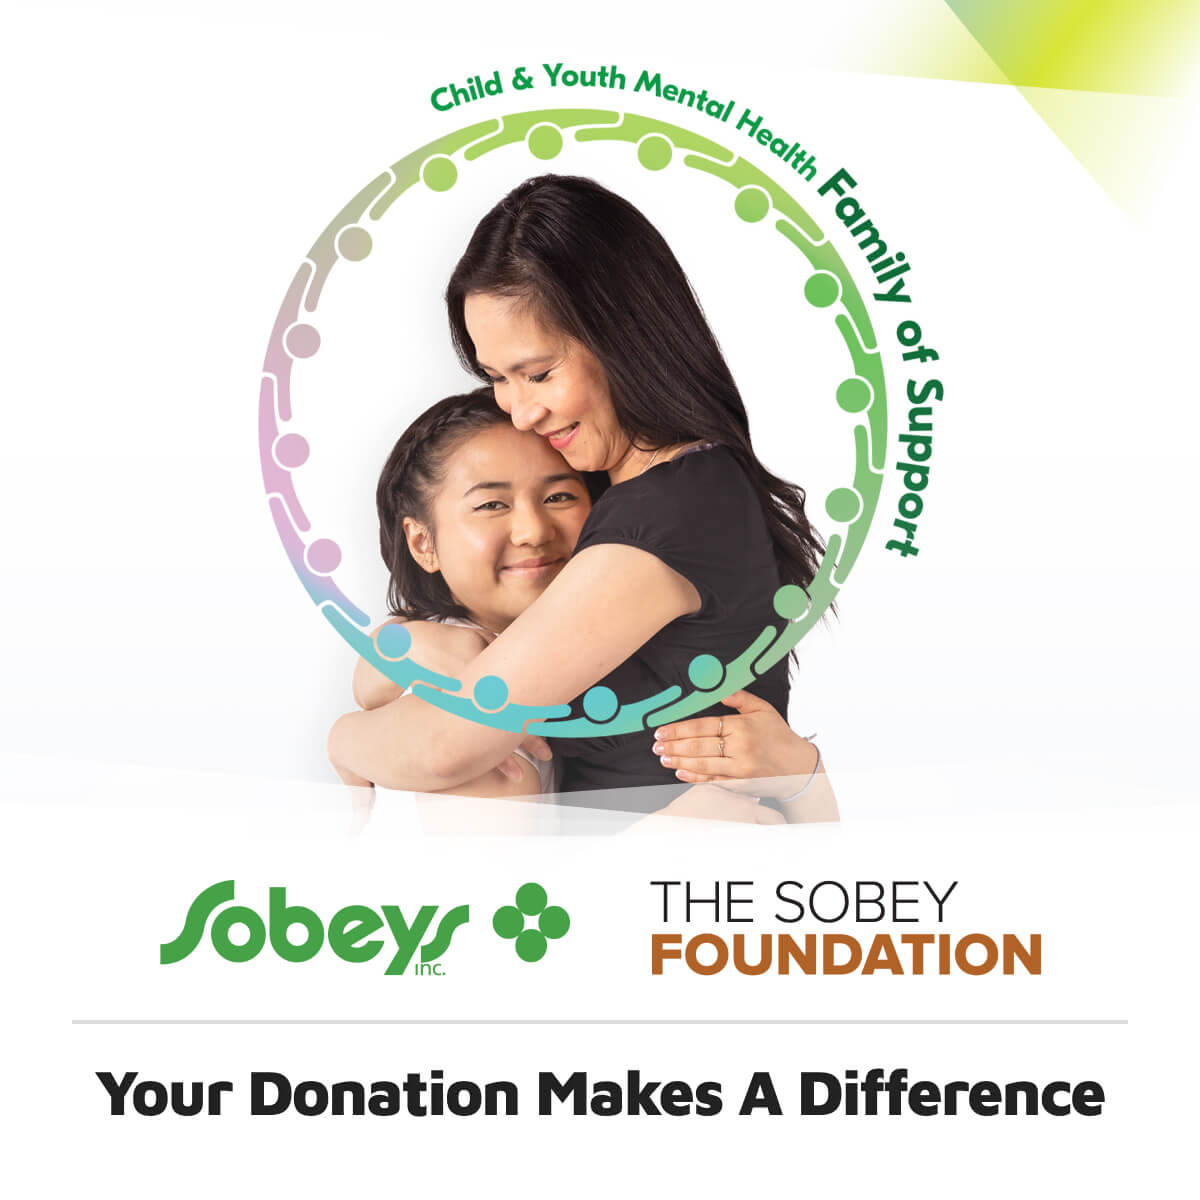 Elly was diagnosed with anorexia at age 13. Family Based Treatment at her local children's hospital helped, and now she’s doing much better. Your donation to @sobeys' Family of Support helps families like Elly’s get help earlier. Donate at your local store today! #FamilyOfSupport